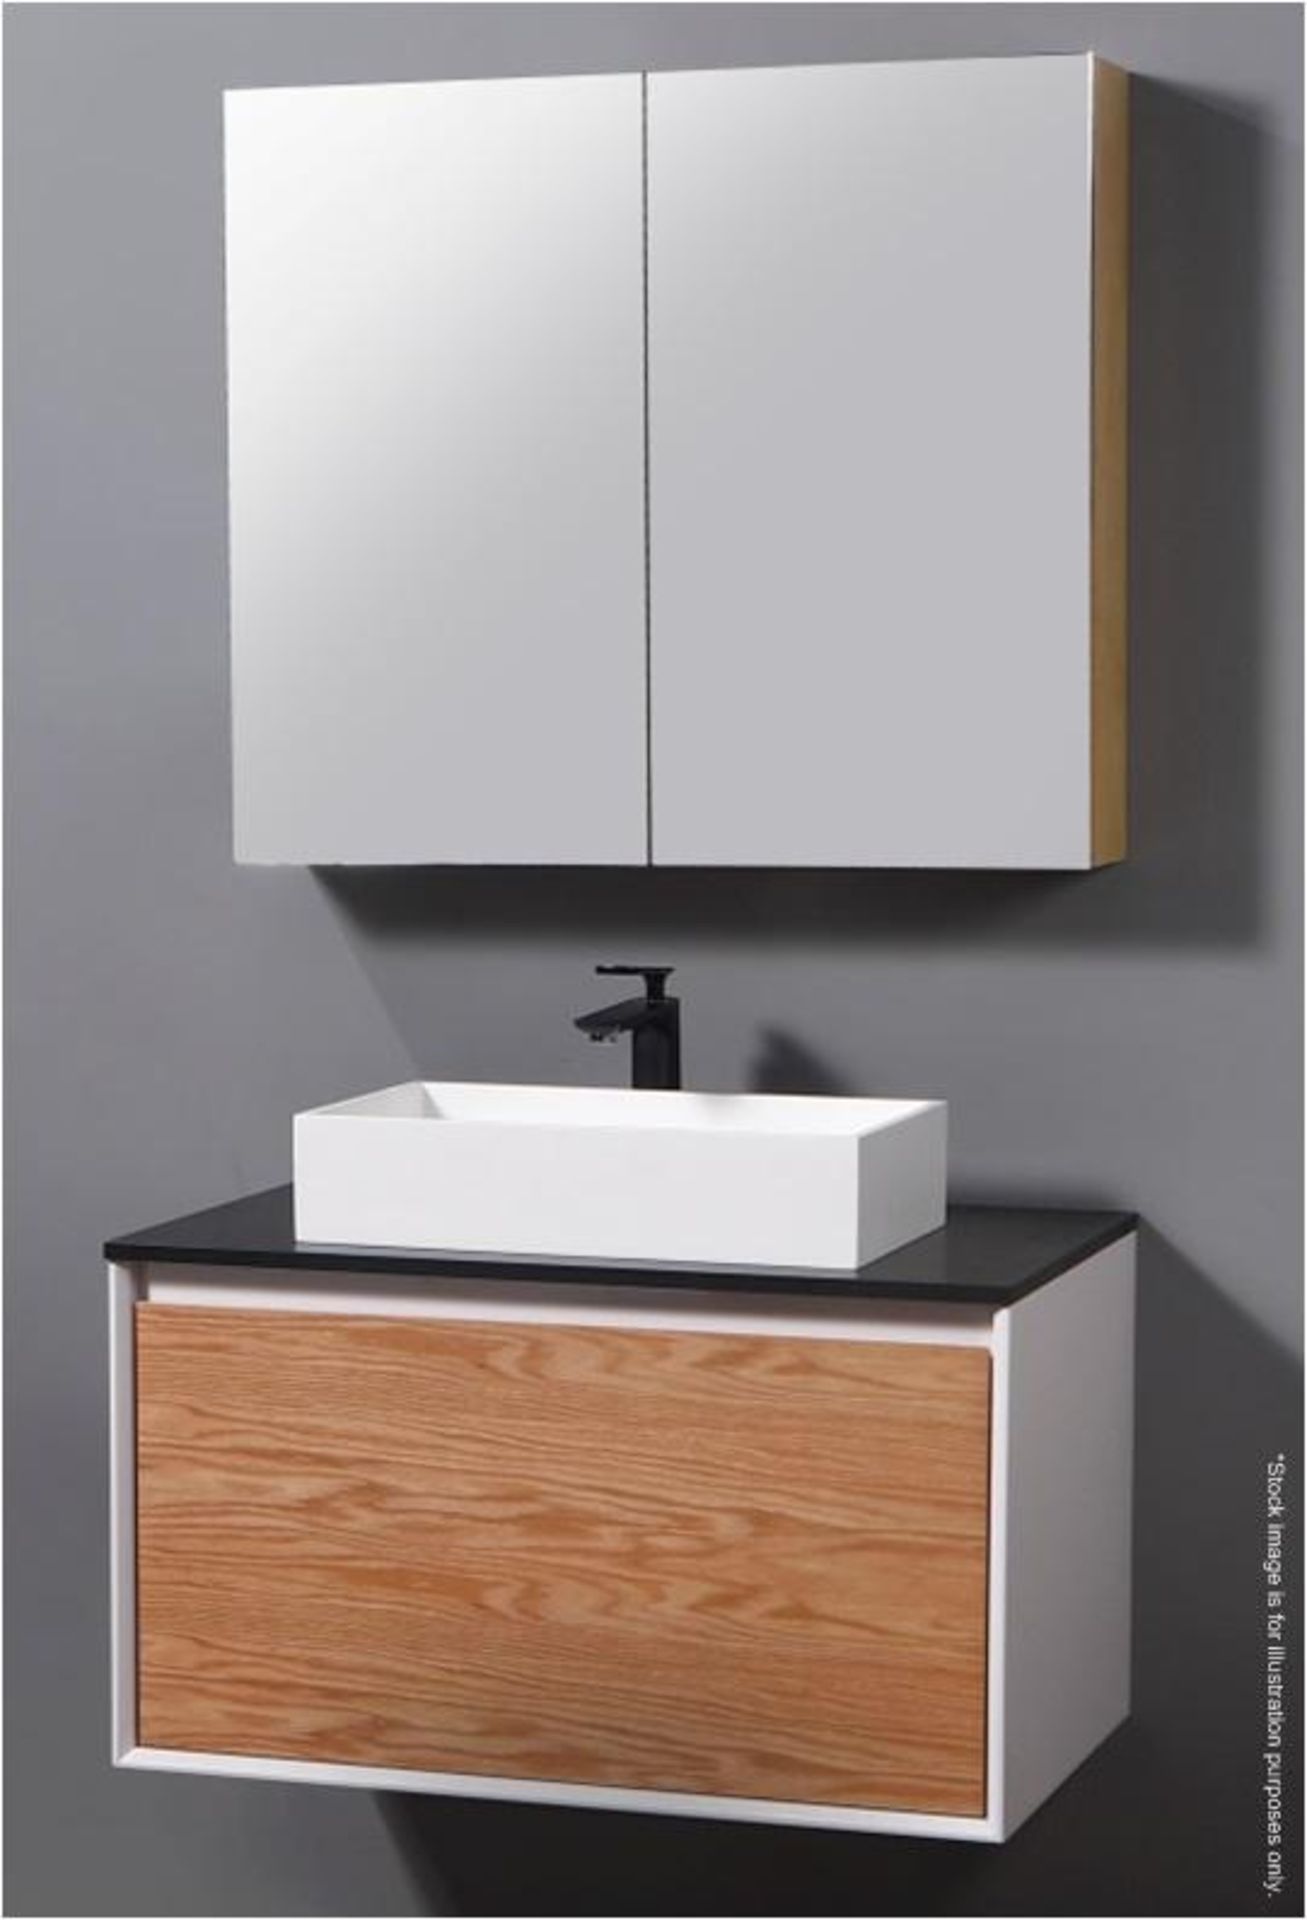 1 x Quartz Stone Topped Wall Hung Bathroom Vanity Unit With A Stone Resin Basin And Soft Close Draw